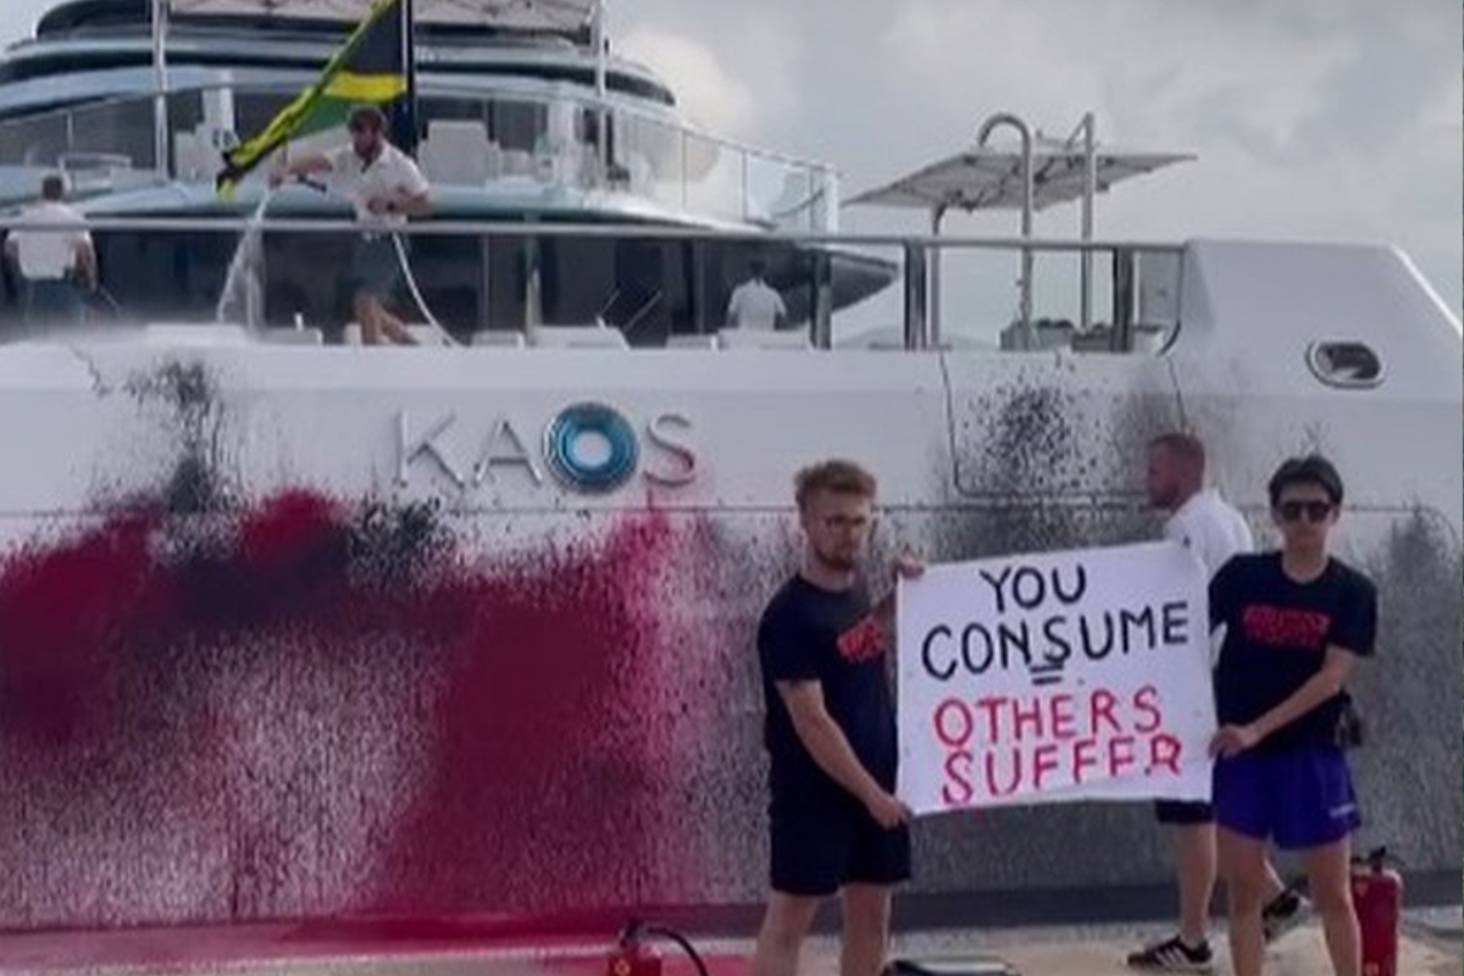 Boat Staff Had To Hose Down A $300 Million Yacht After Climate Activists Blasted Red And White Paint Onto It